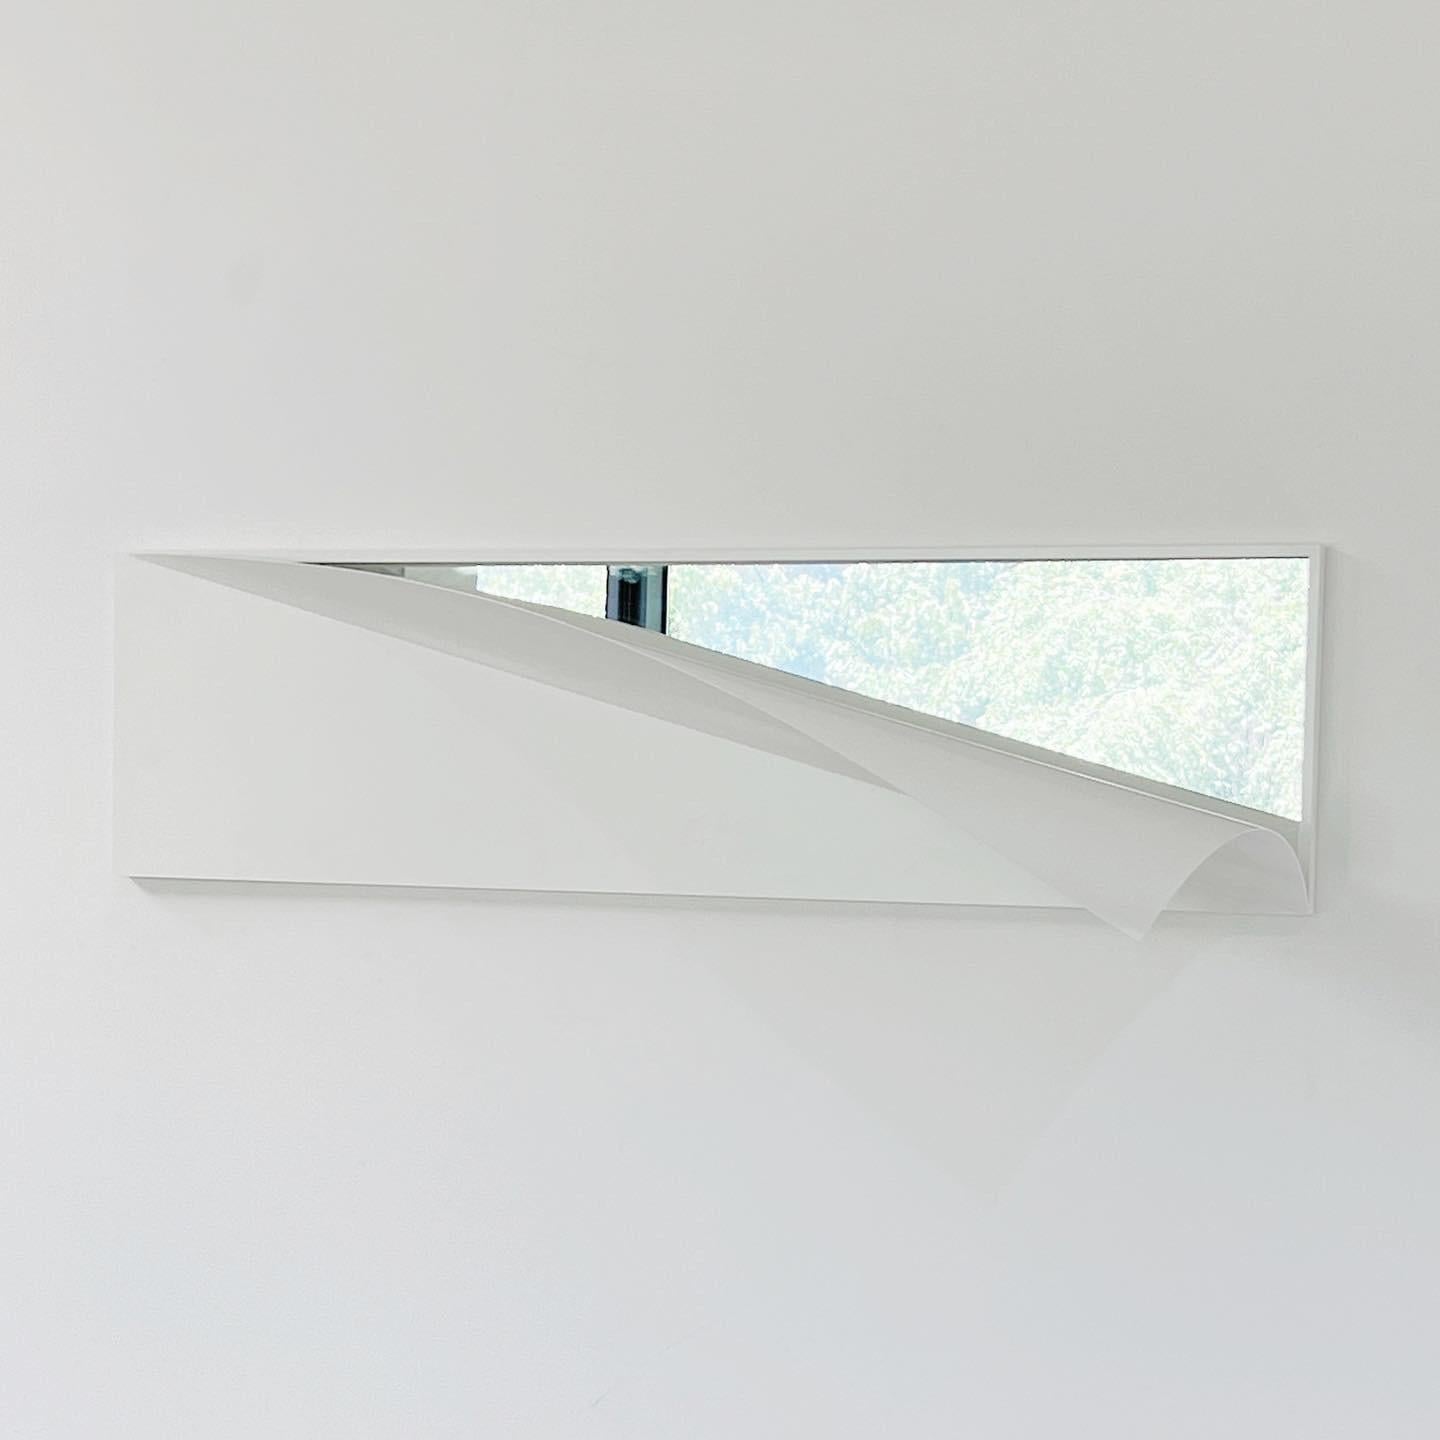 Name : HWI(翬) Wall Mirror
Designer : Lim, Joohee
Date of Manufacture  : 2022
Material : Stainless Steel, Powder Coat, Mirror
Condition : New
Country of Manufacture: South Korea
Size : 120cm(W) ​​x 33cm(H)


Artist Notes:
The HWI series has the dual